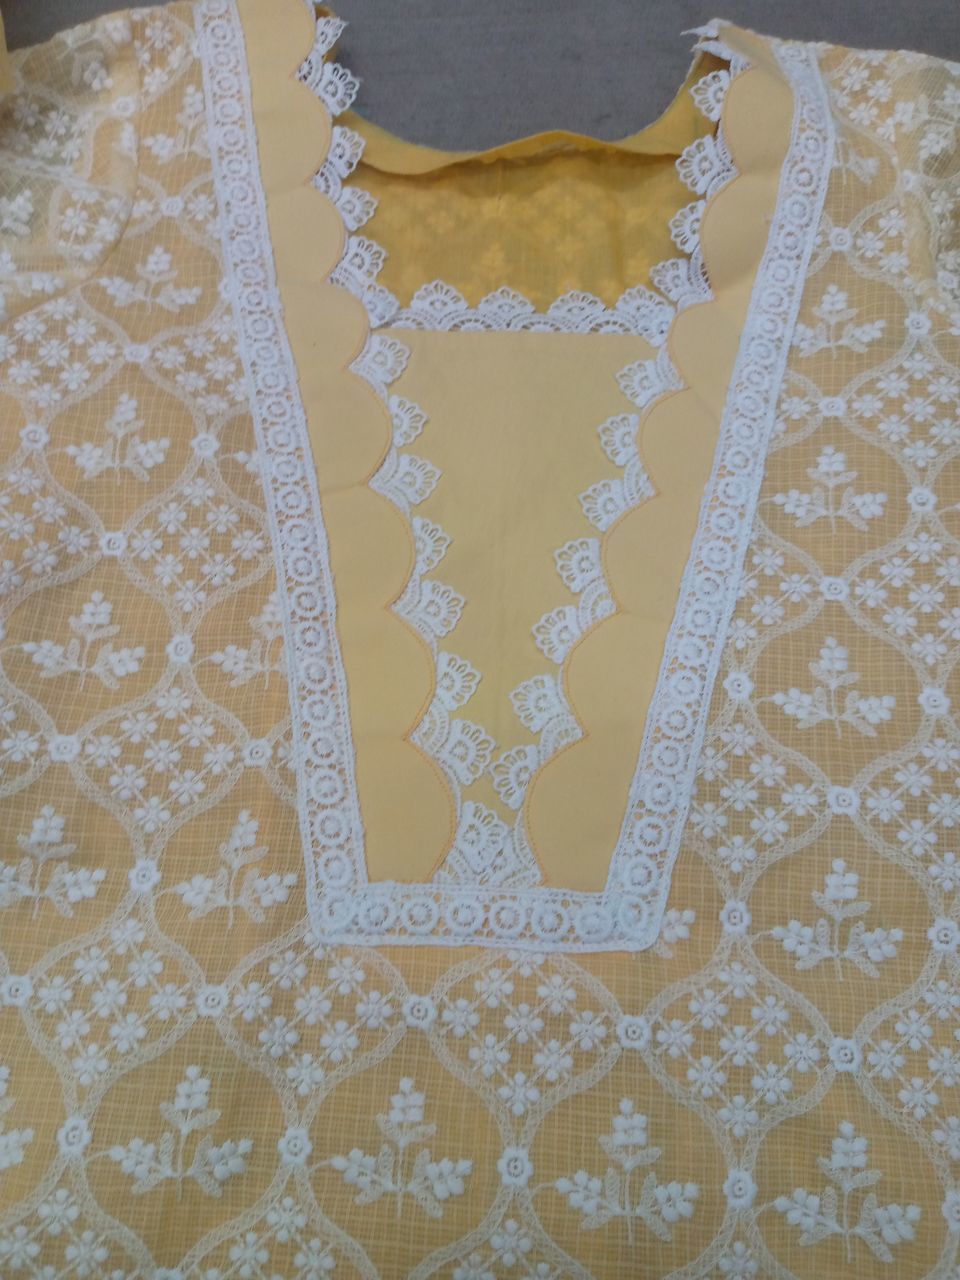 pattern, lace, textile, floral pattern, art, no people, indoors, tablecloth, close-up, fashion, yellow